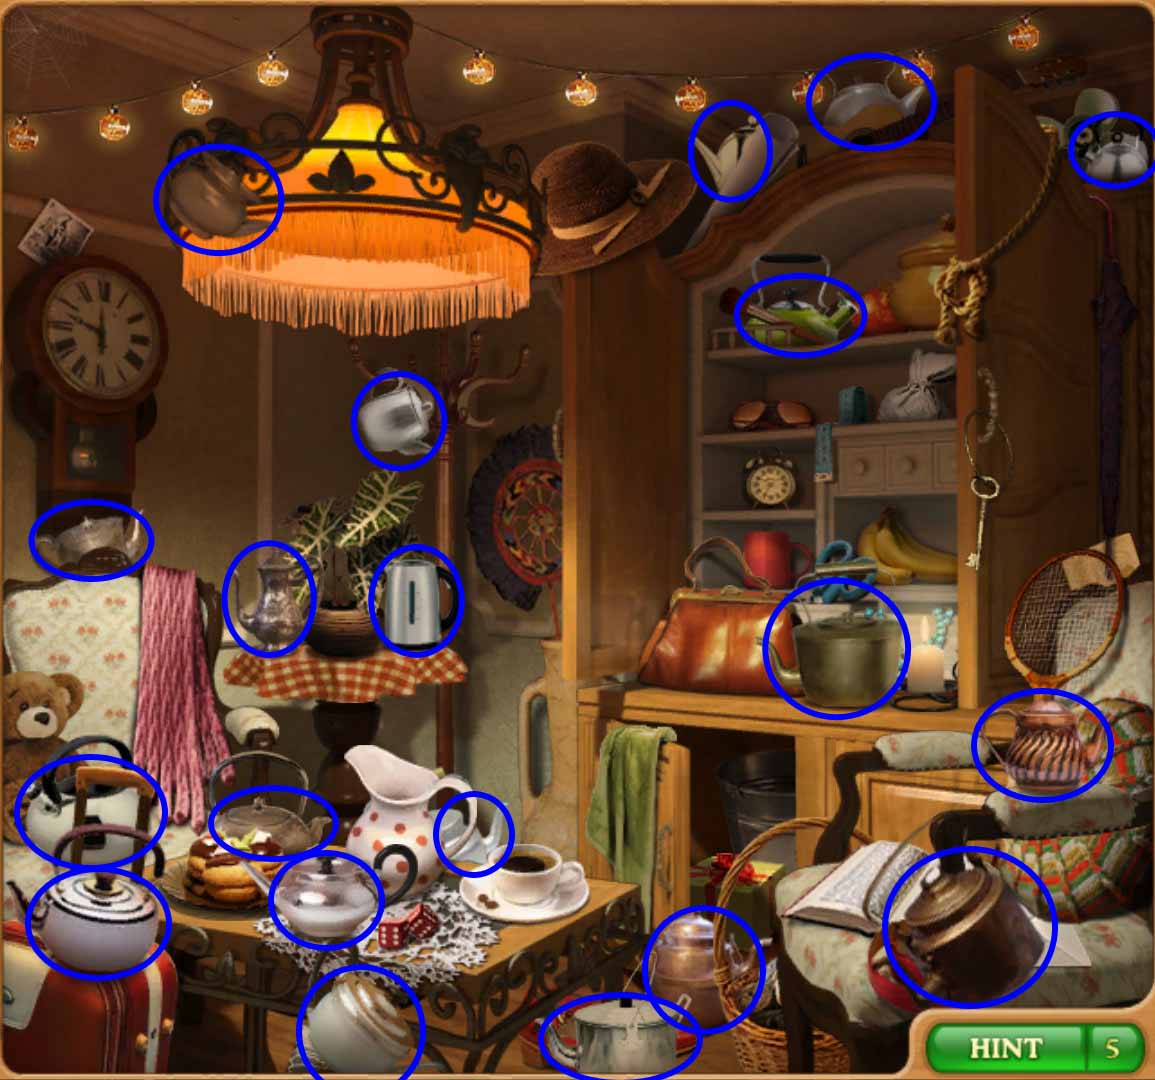 play free online games hidden objects gardenscapes 2 mansion makeover